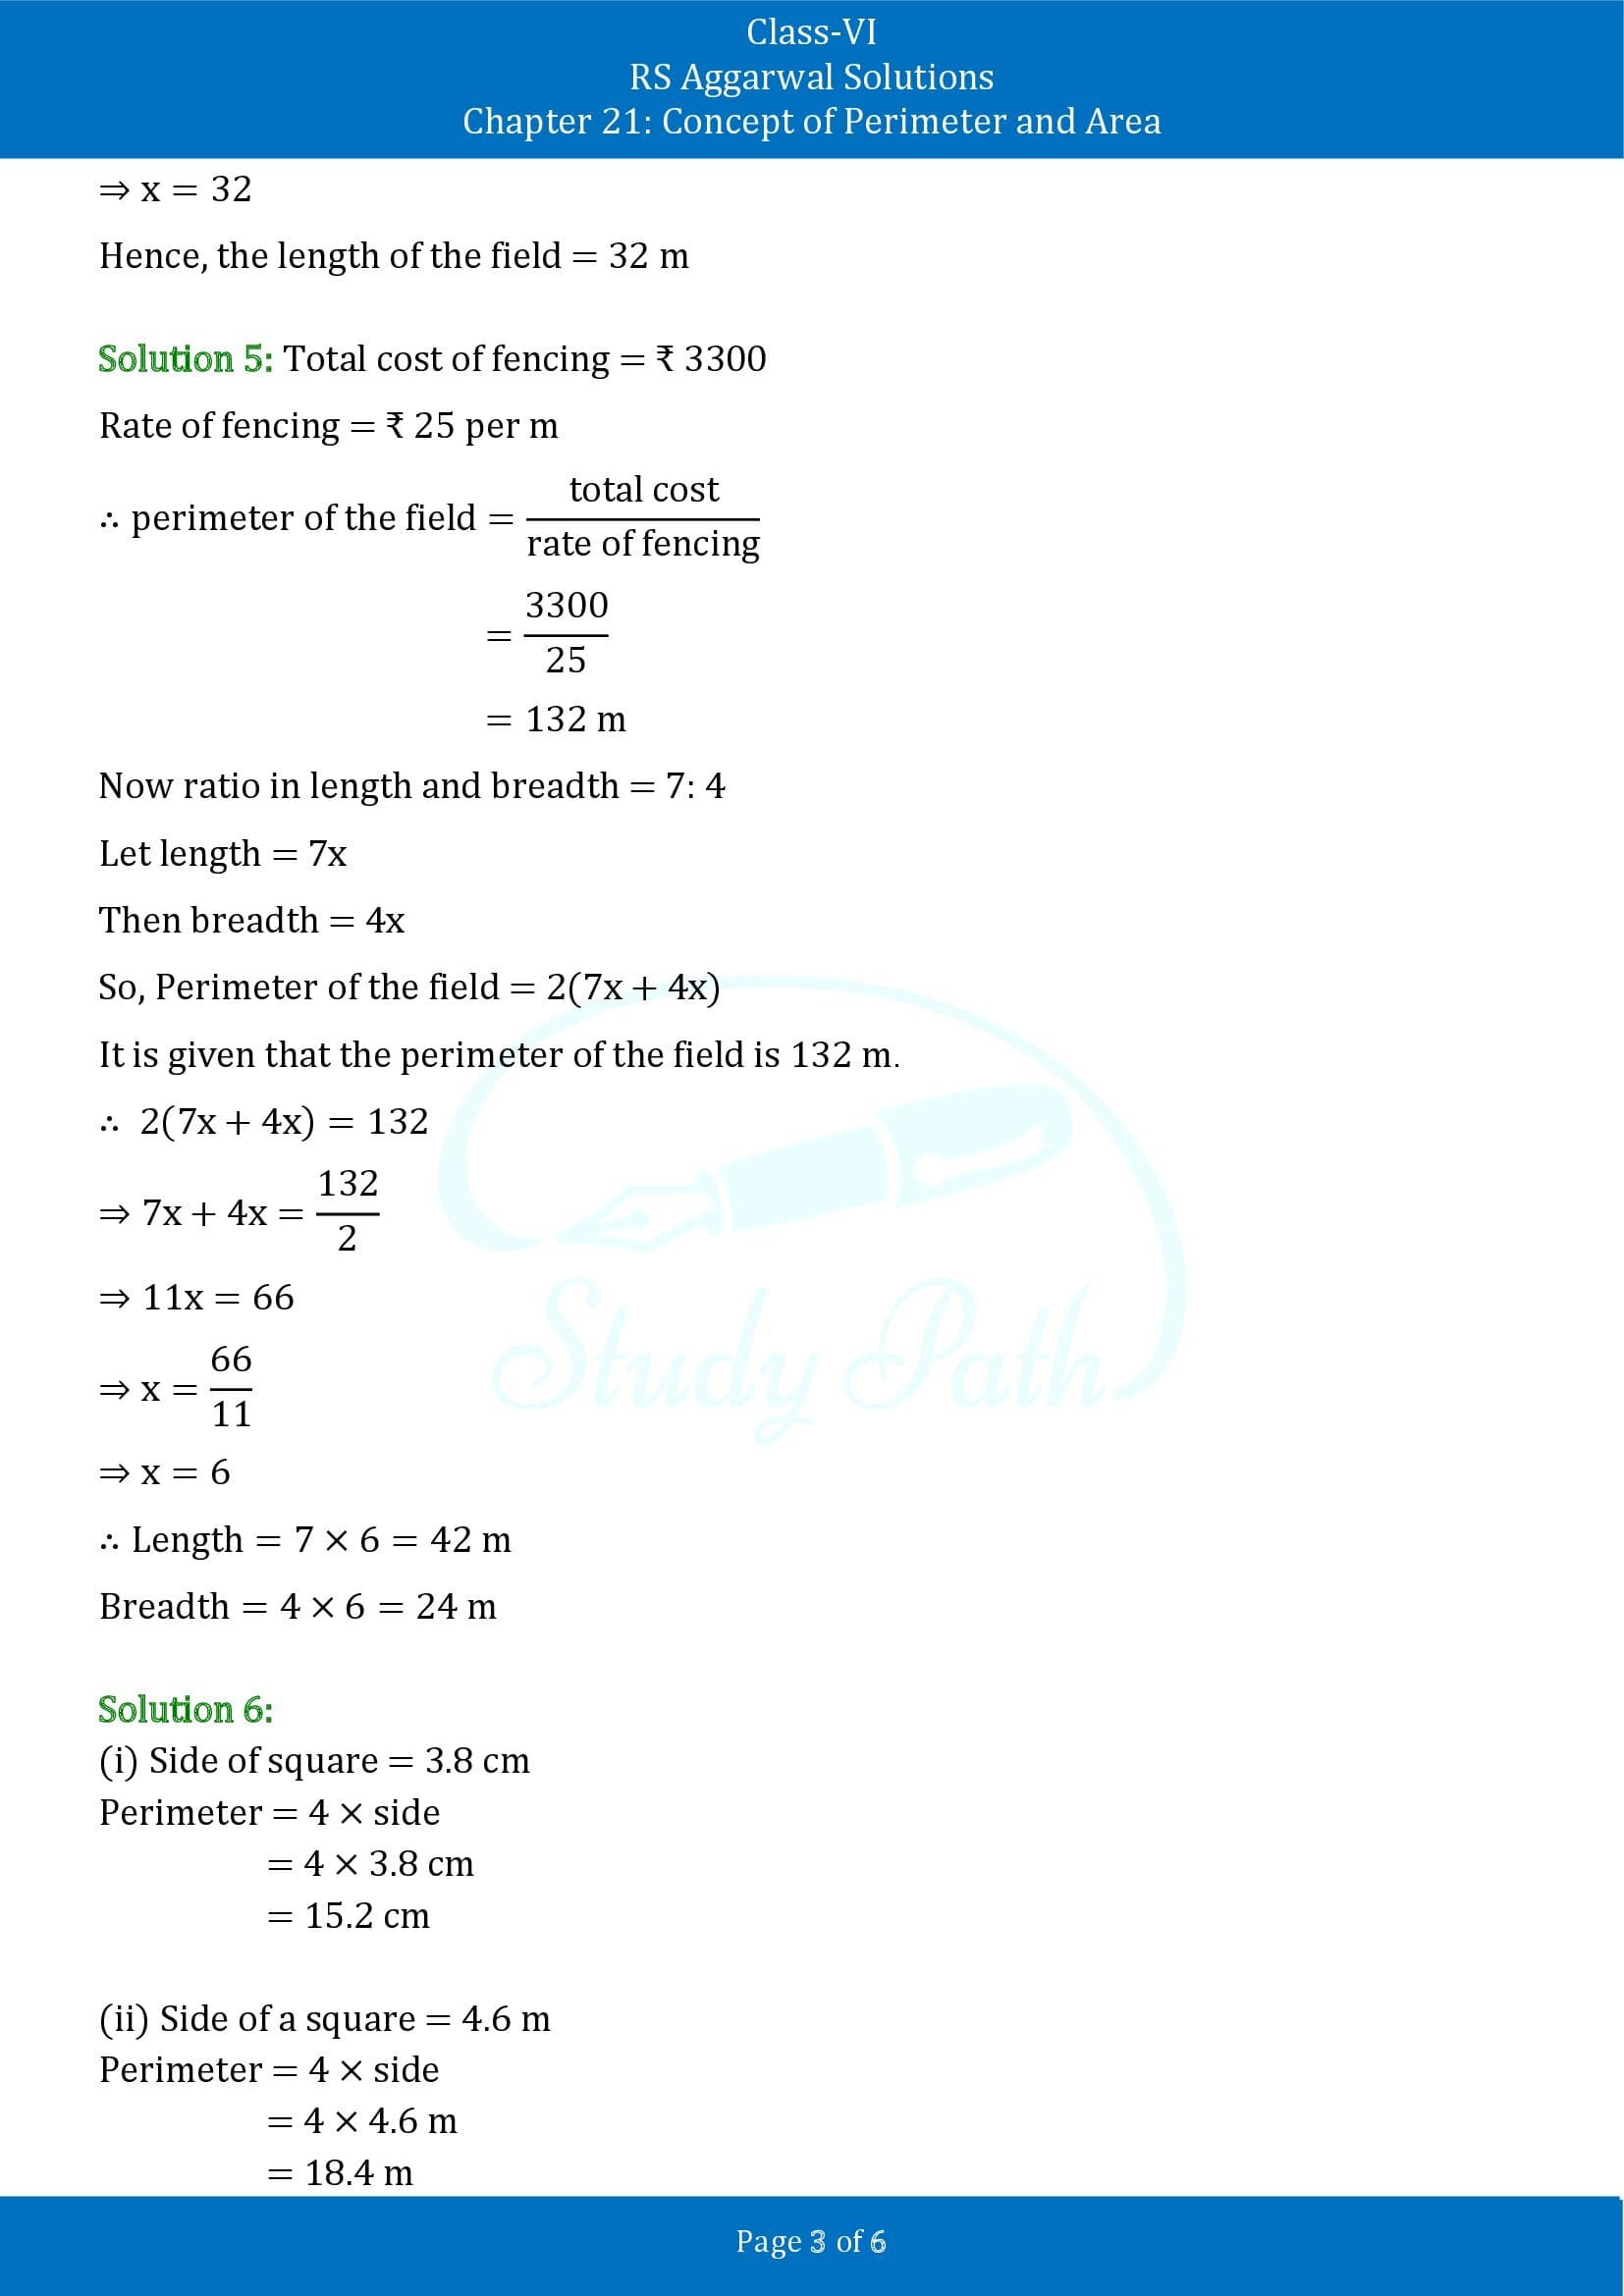 RS Aggarwal Solutions Class 6 Chapter 21 Concept of Perimeter and Area Exercise 21A 00003